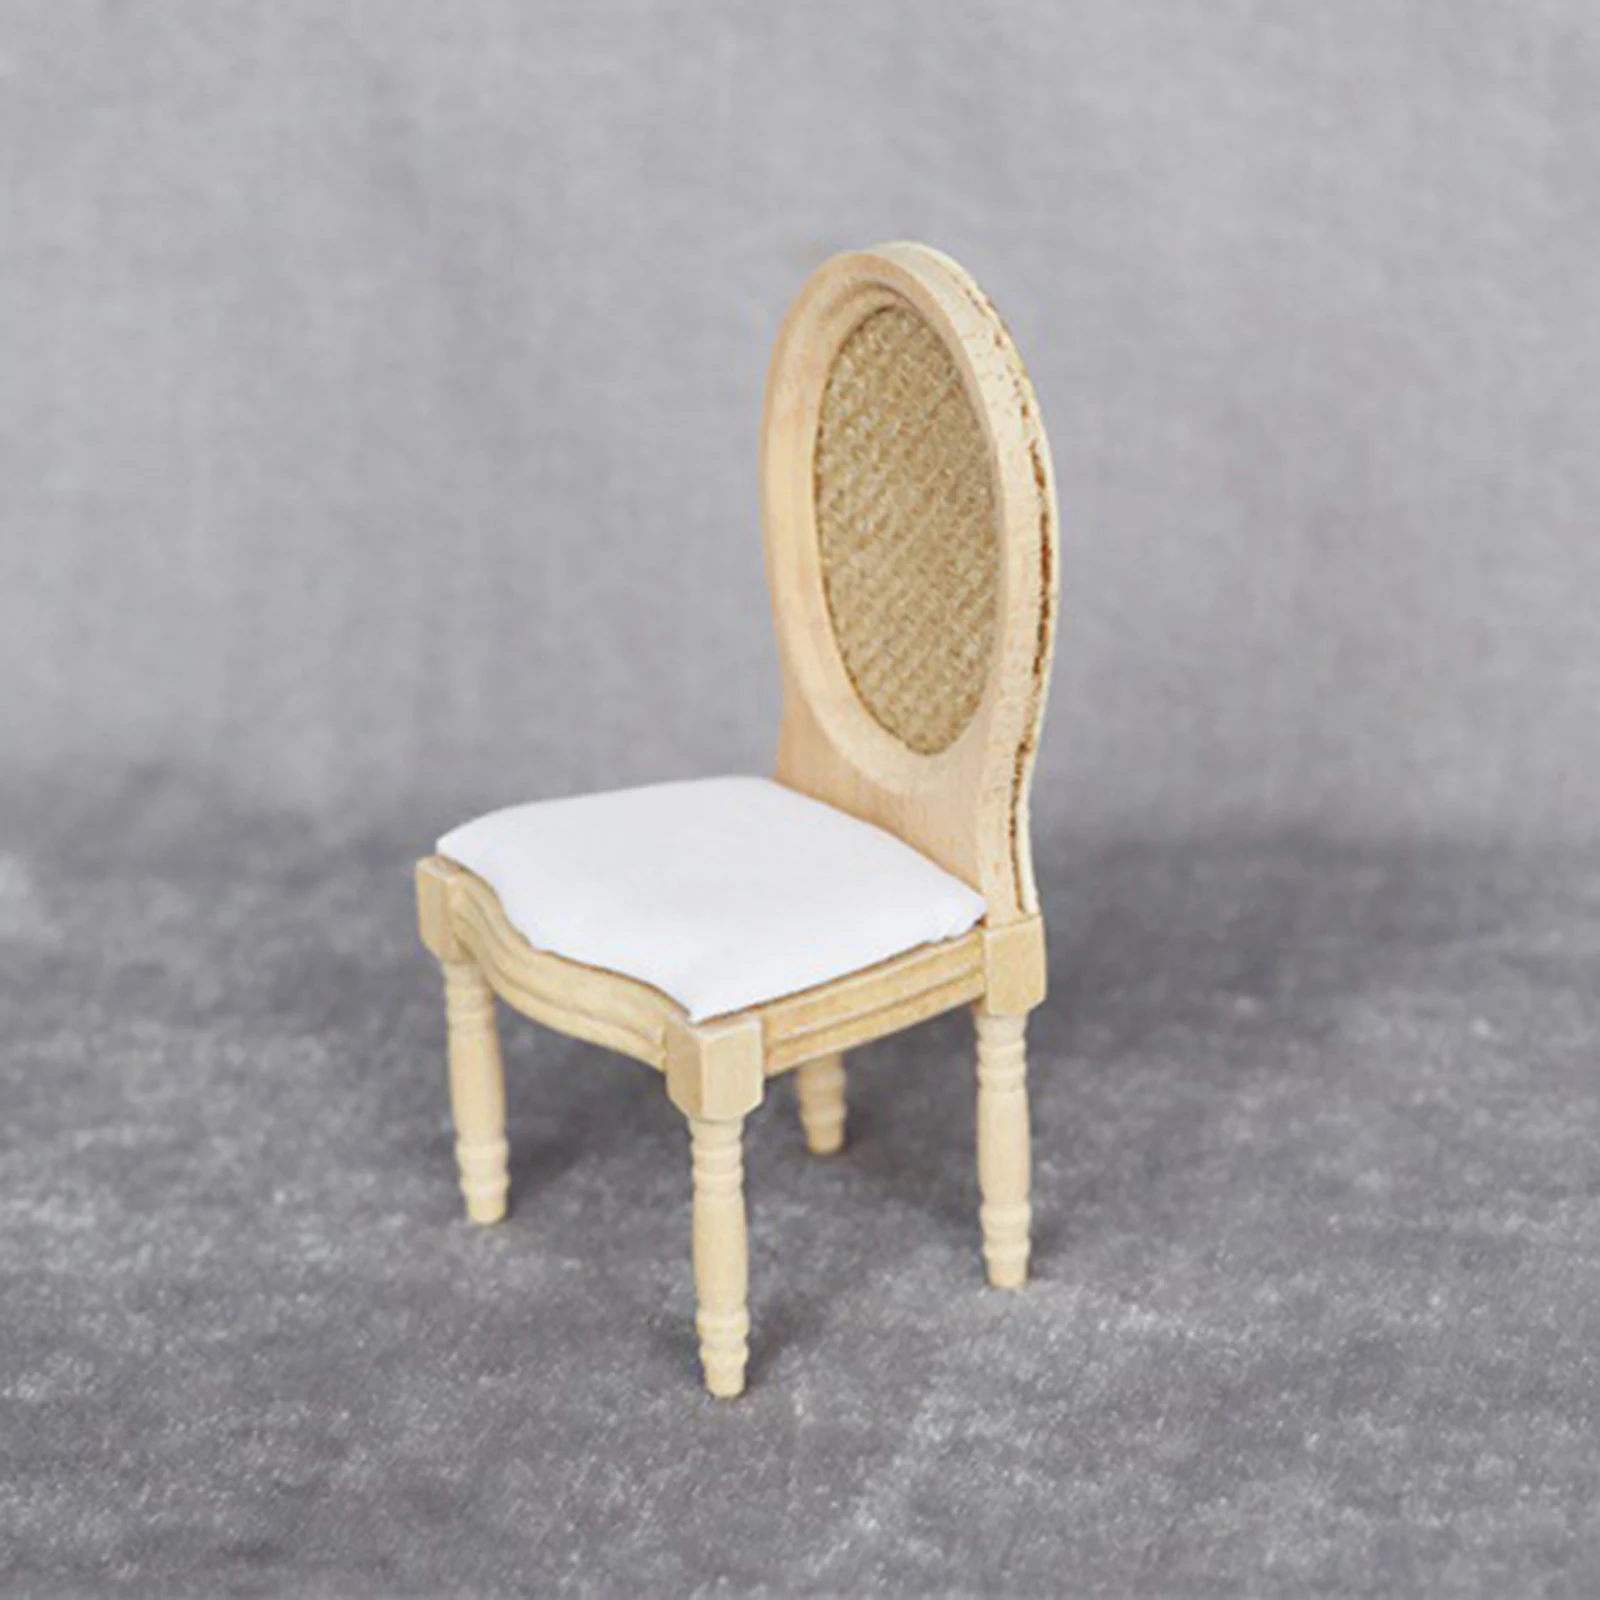 1/12 dollhouse armchair miniature furniture living room accessories wooden toys